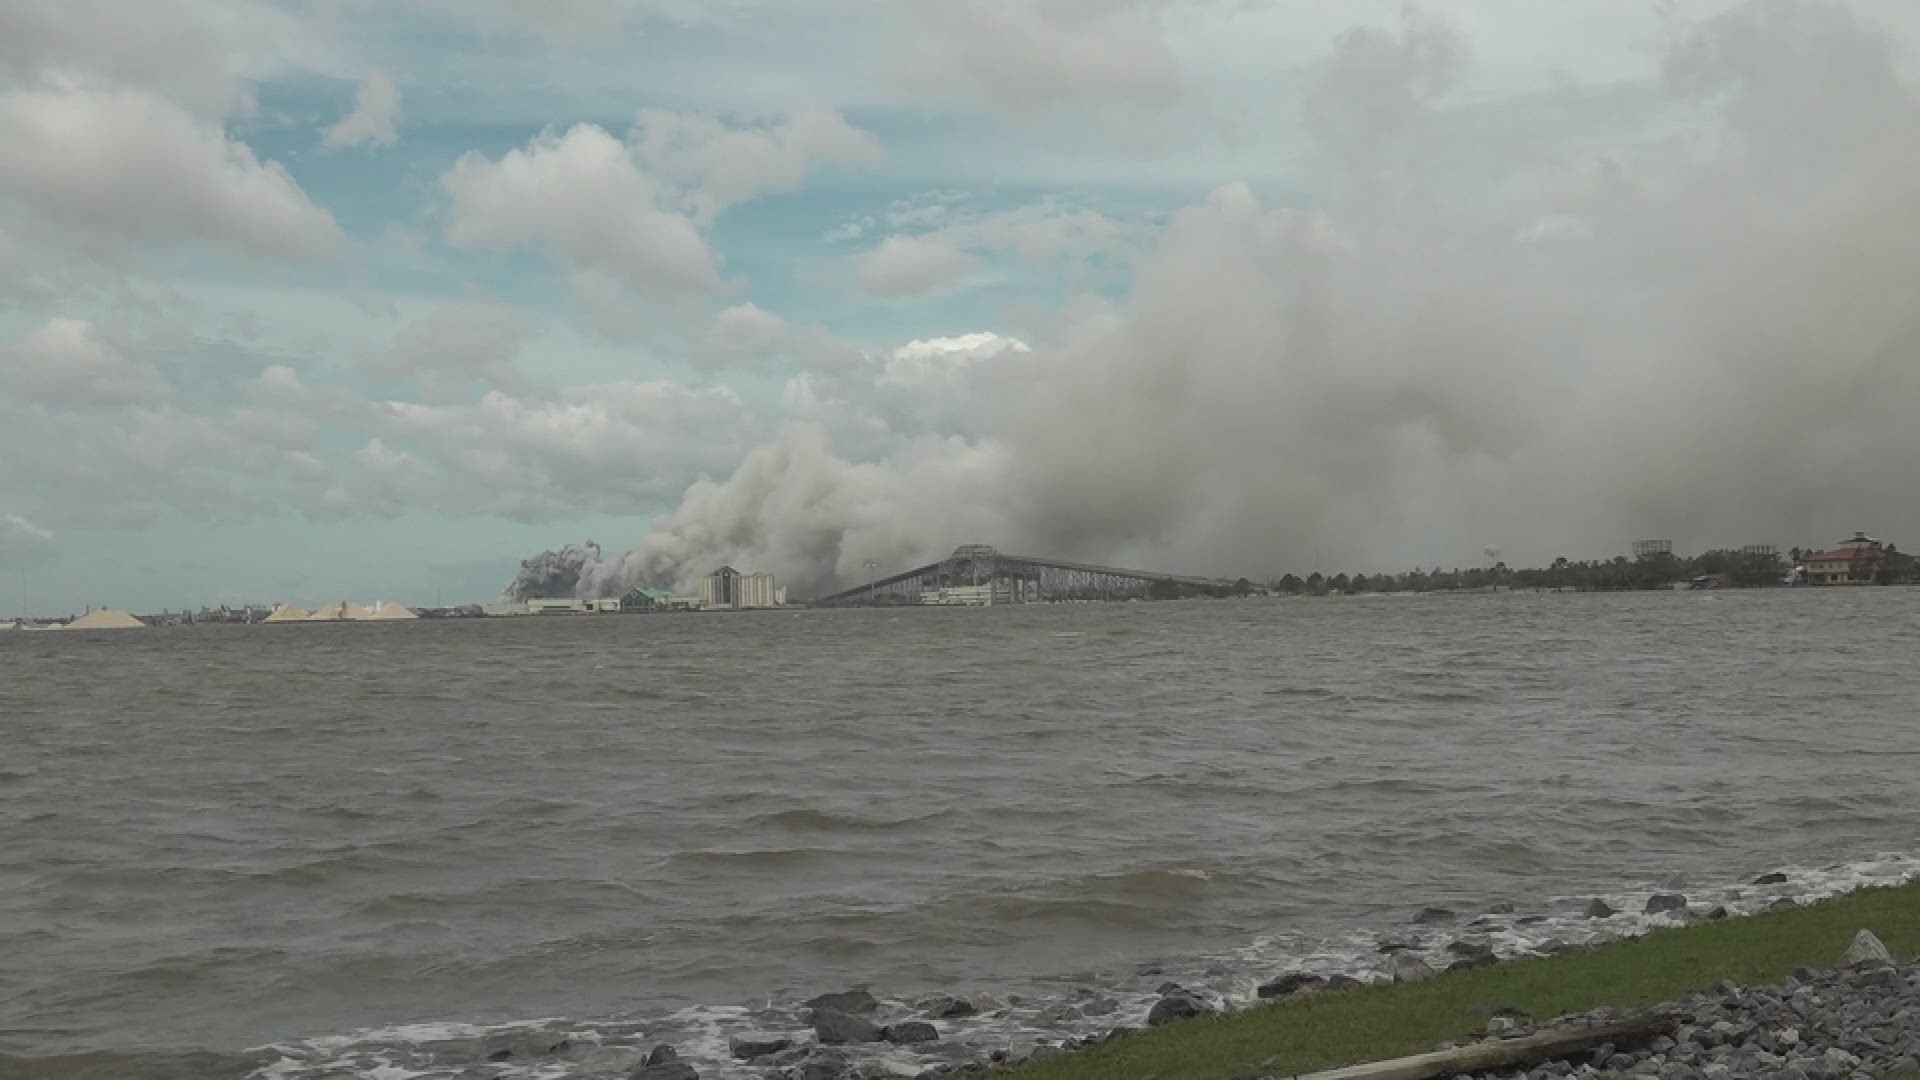 Crews are battling a refinery fire near Lake Charles, Louisiana. There is a shelter-in-place order for the residents.